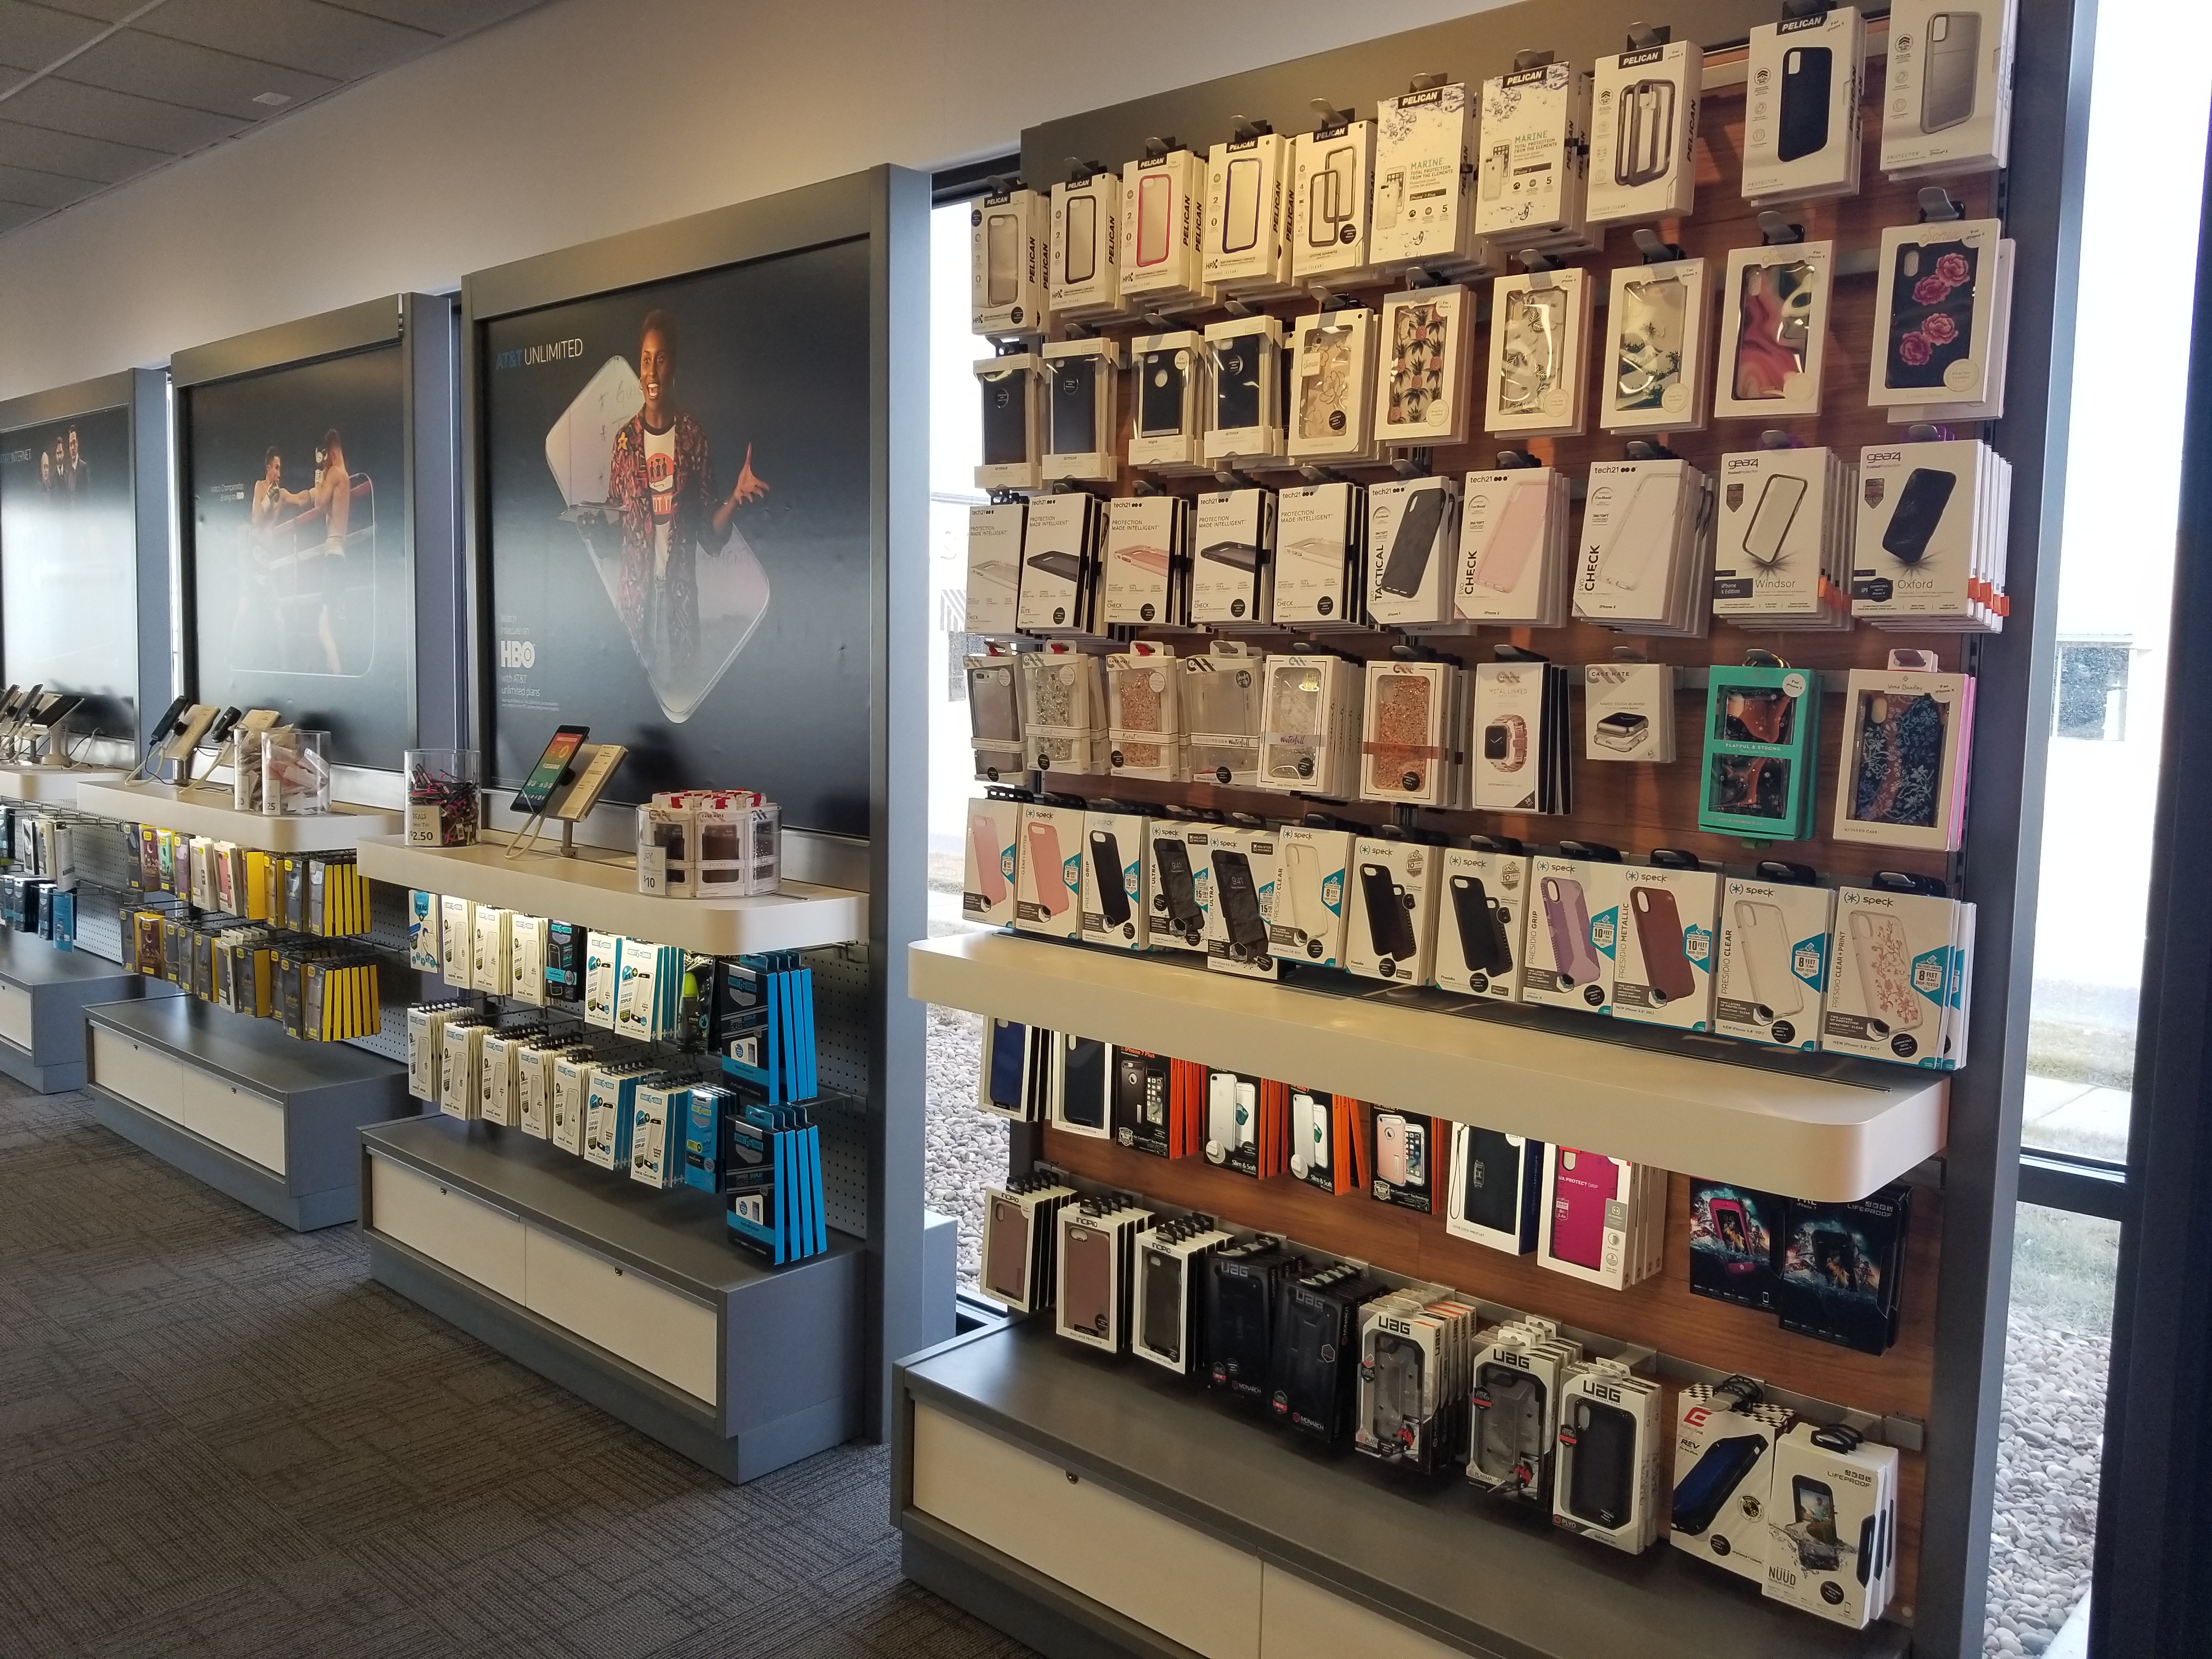 AT&T Store | 3407 10th St, Suite A, Great Bend, KS, 67530 | +1 (620) 603-4971